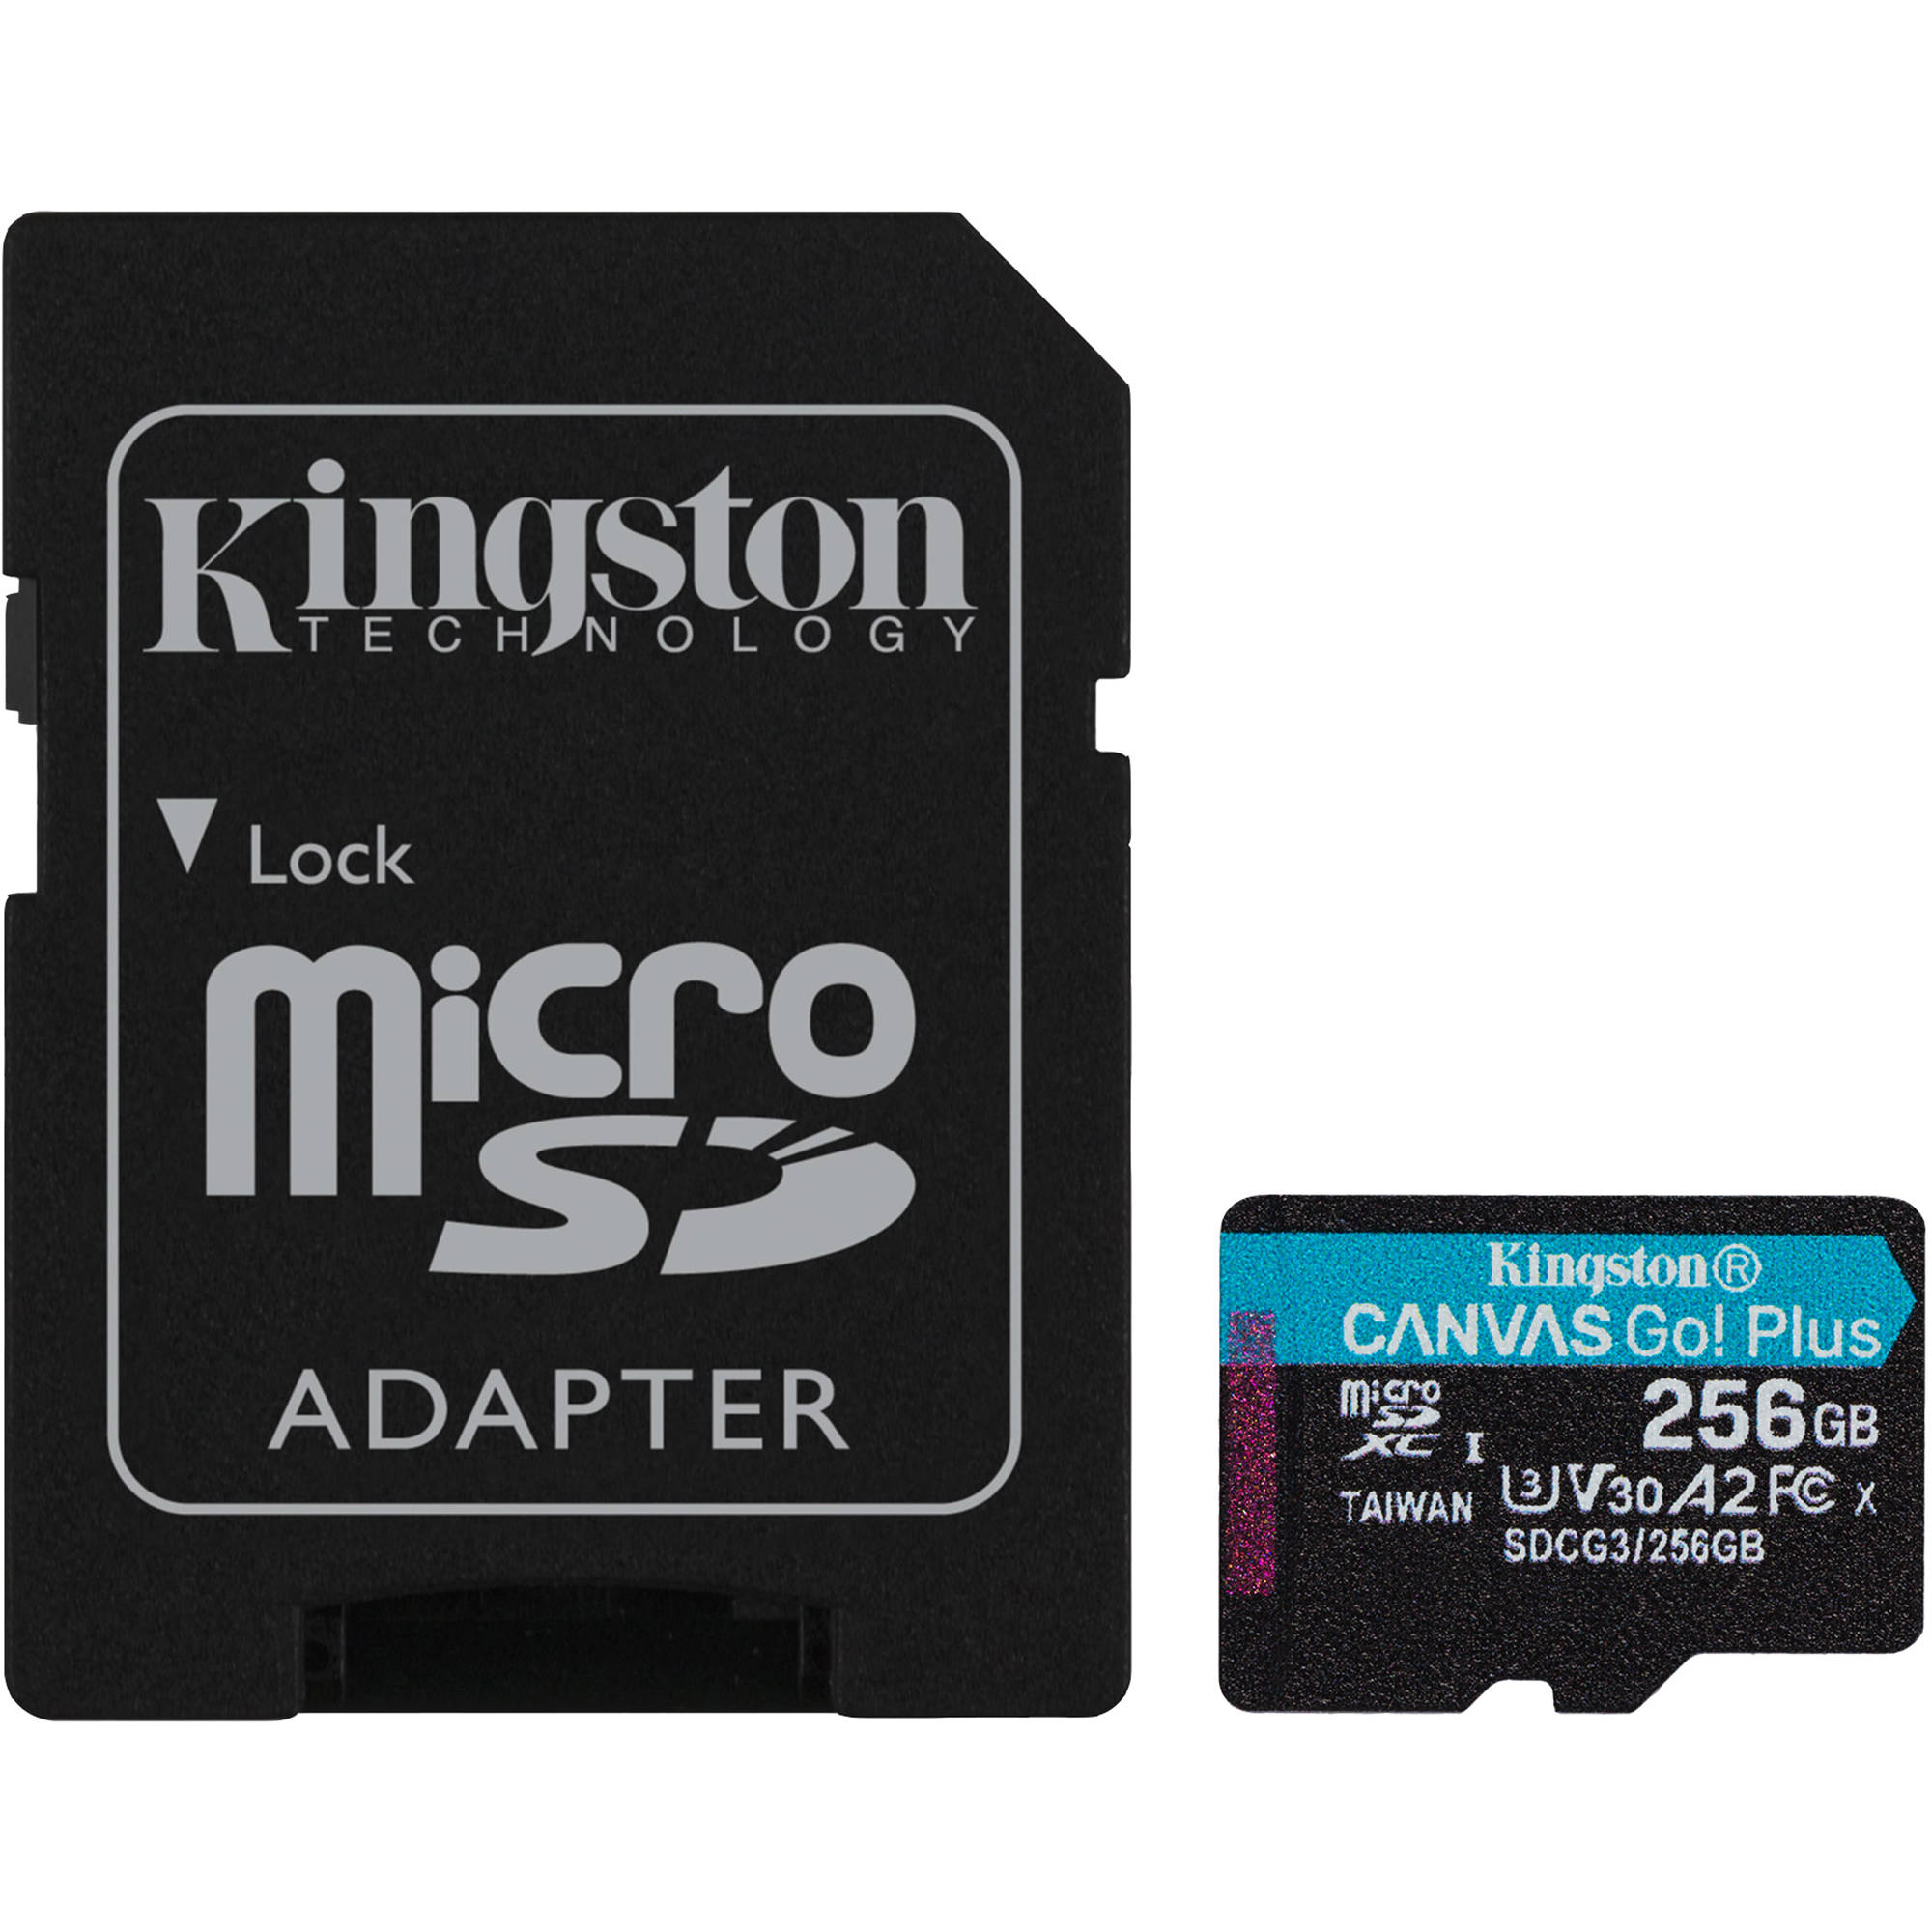 Photo 1 of 2 Kingston 256GB Canvas Go! Plus UHS-I microSDXC Memory Card with SD Adapter